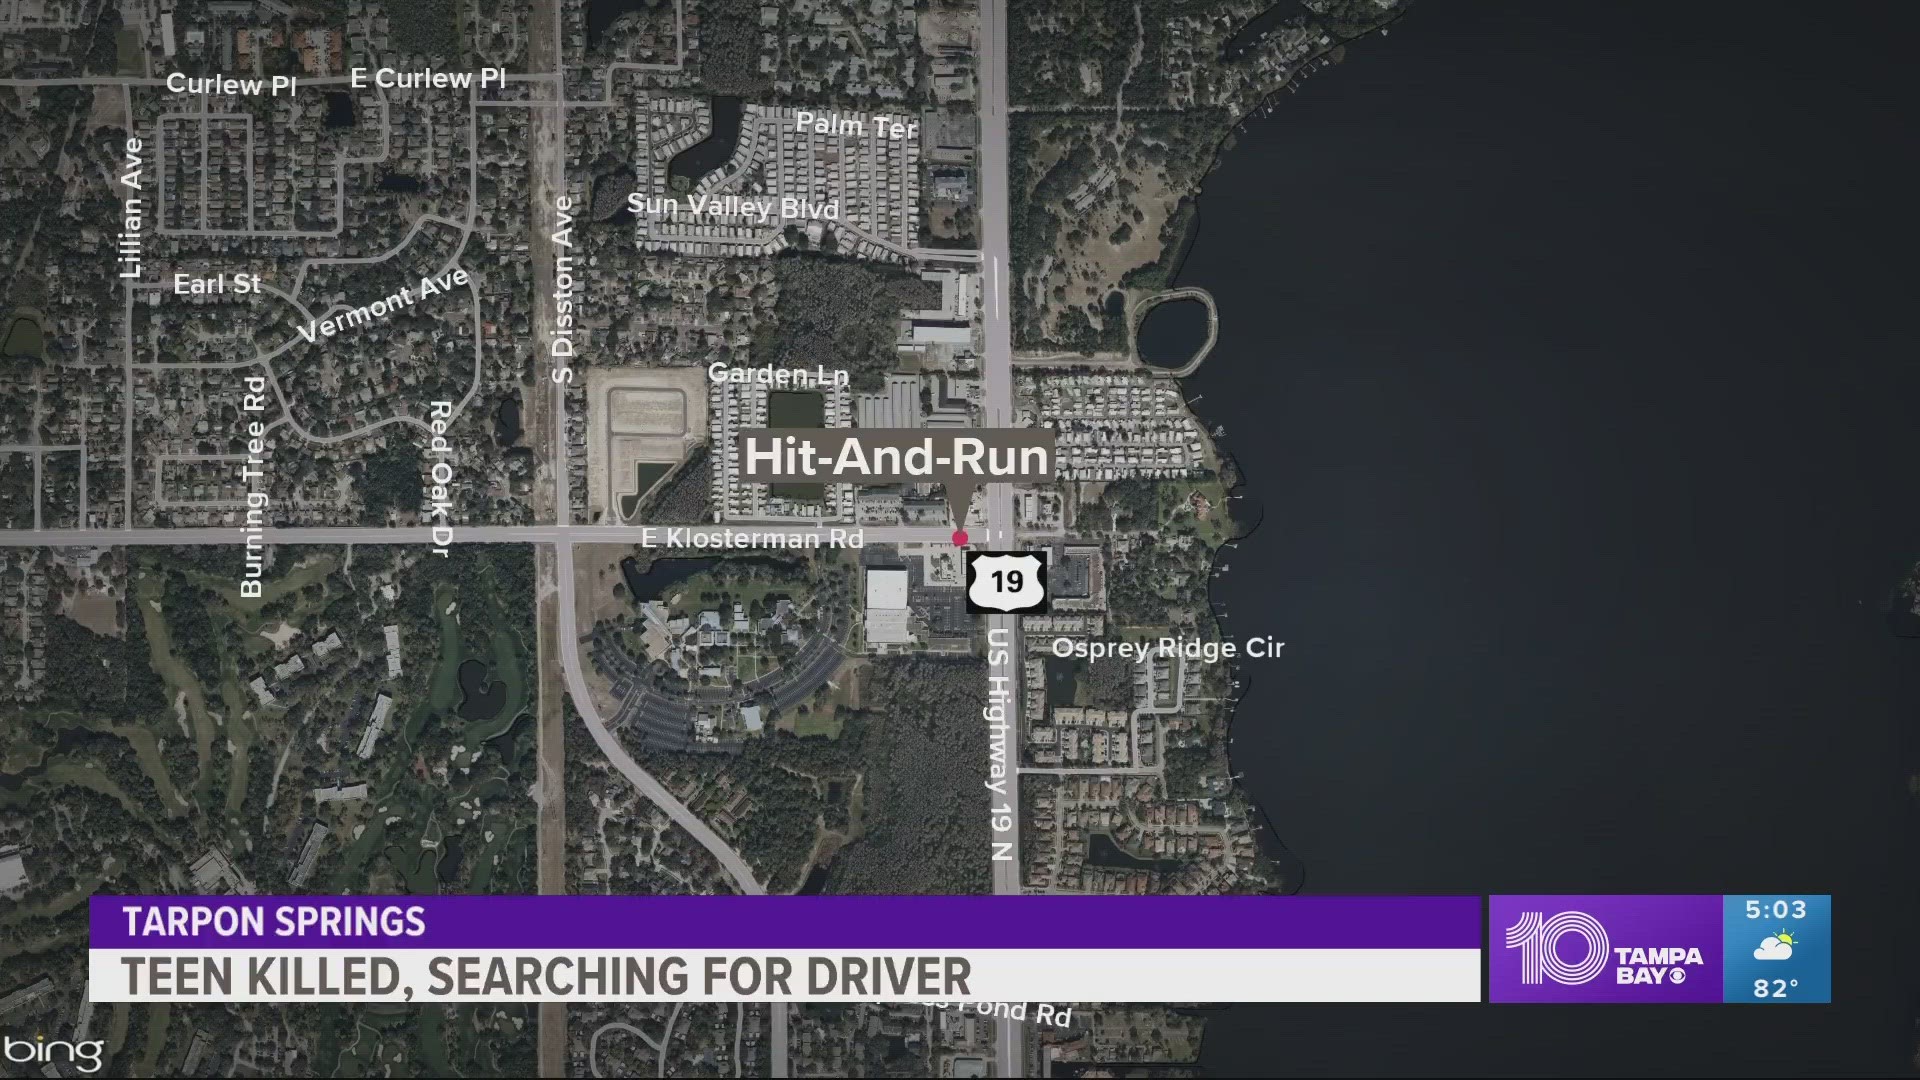 A 32-year-old man in Clearwater was killed after a driver hit him with their car and kept on driving, police said. A teen was killed in Tarpon Springs.